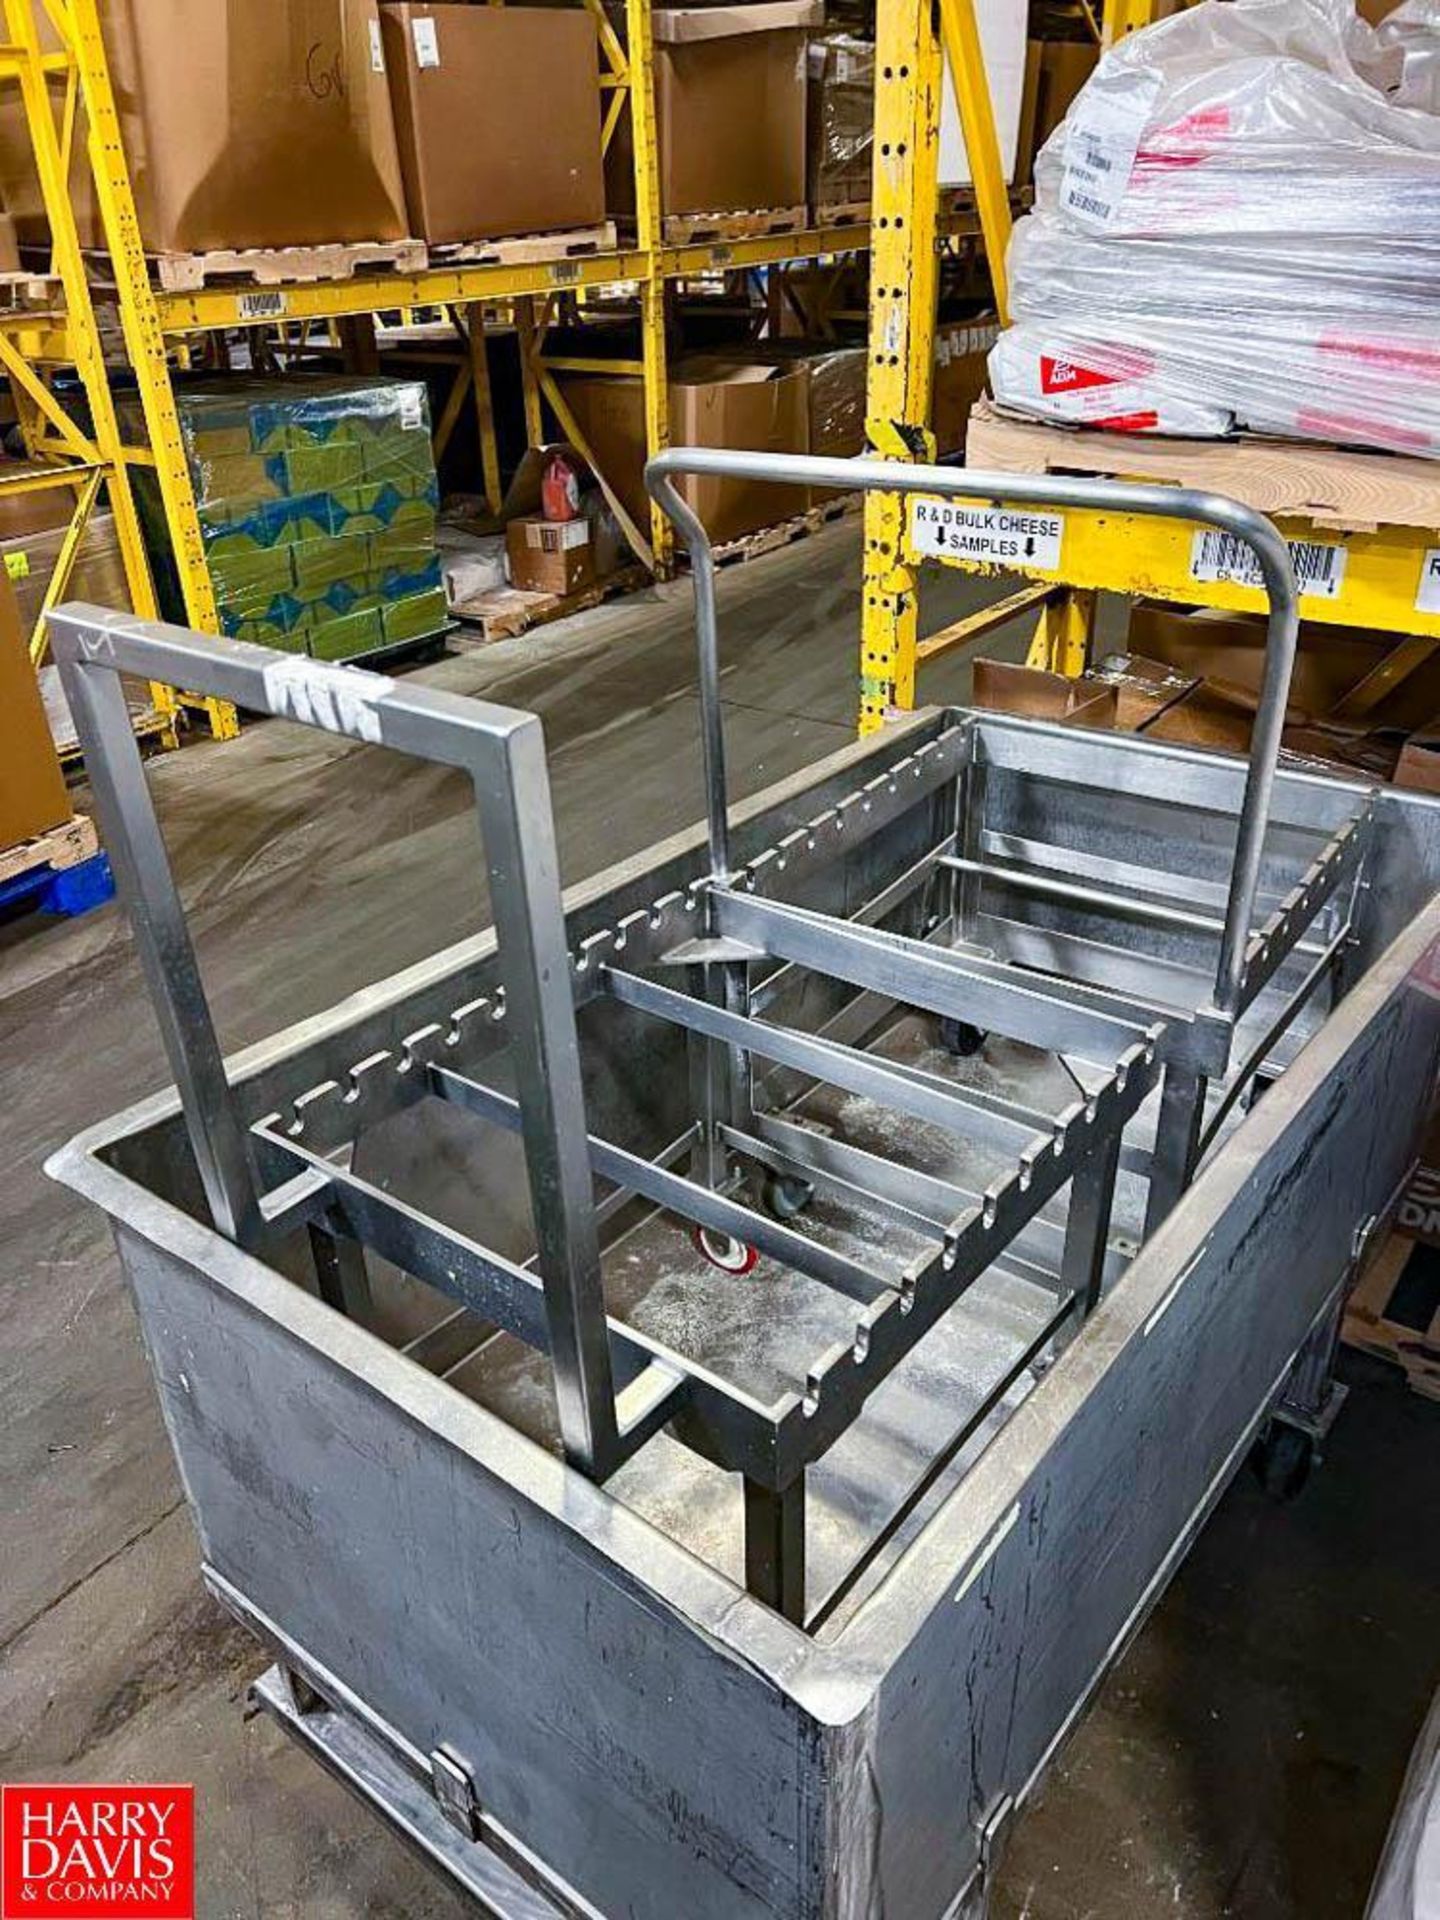 Mobile S/S Roller Conveyor Carts, Dimensions = 28" x 25" (Rollers Not Included)